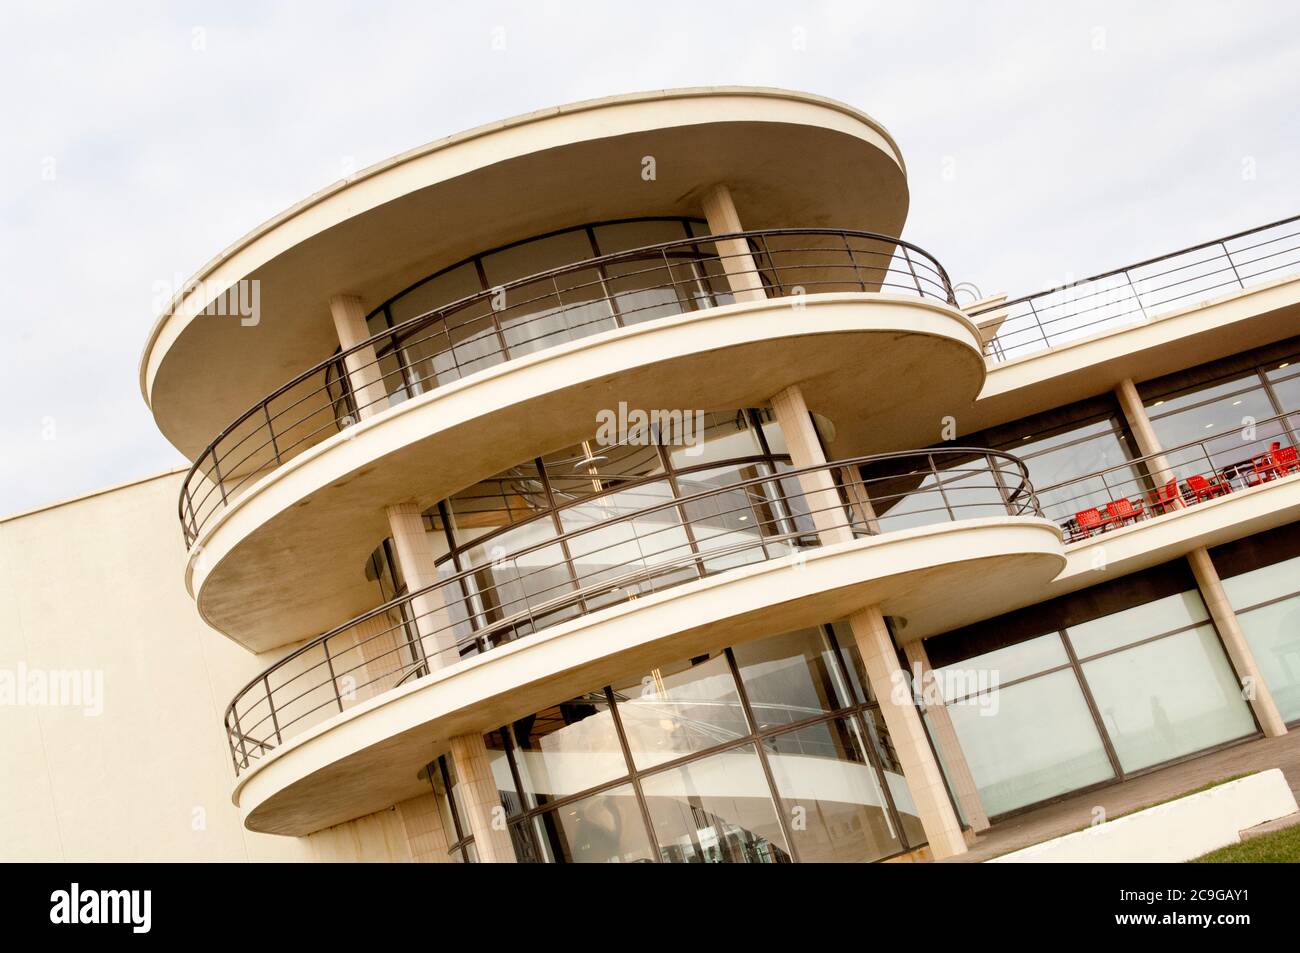 De La Warr Pavilion an Art Deco building in Bexhill On Sea, East Sussex designed by erich mendelsohn and serge chermayeff, constructed 1935. Stock Photo